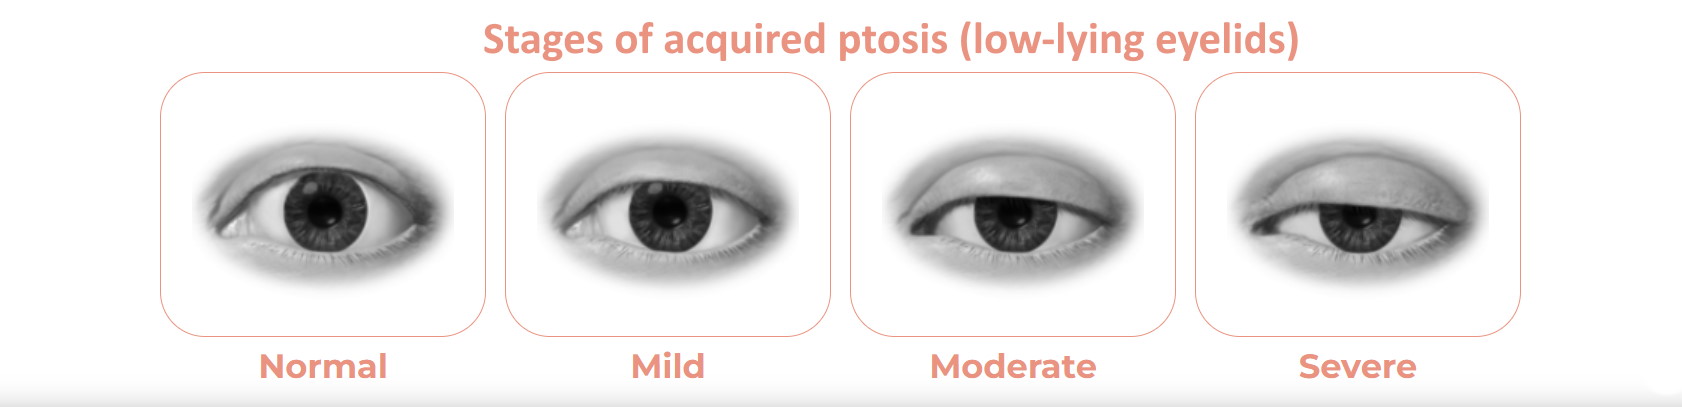 acquired ptosis graphic showing low eyelids